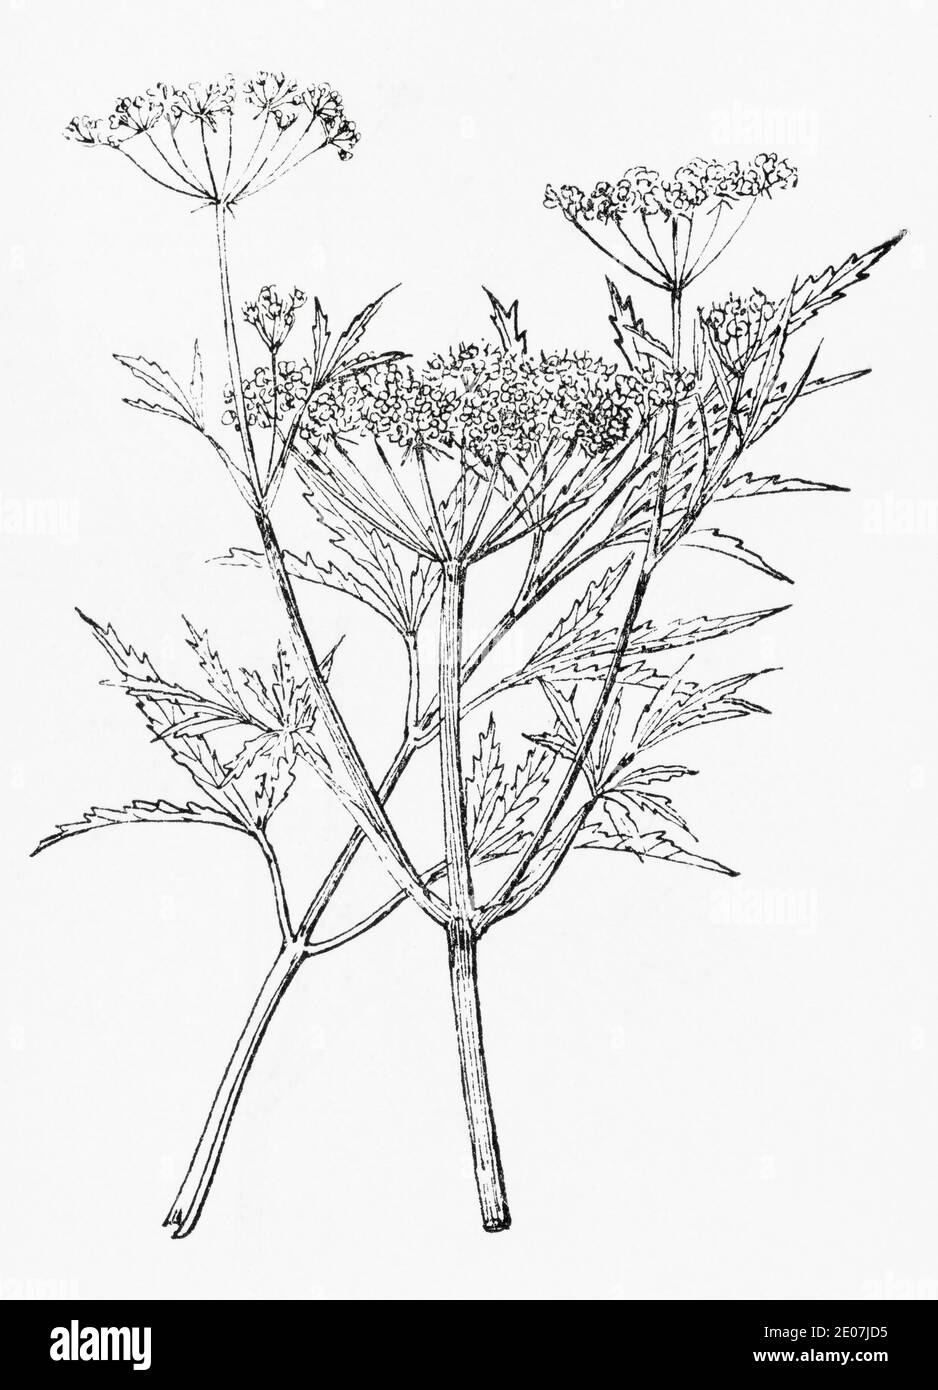 Old botanical illustration engraving of Water Hemlock, Cowbane / Cicuta virosa. Deadly poisonous medicinal herbal plant found in UK. See Notes Stock Photo